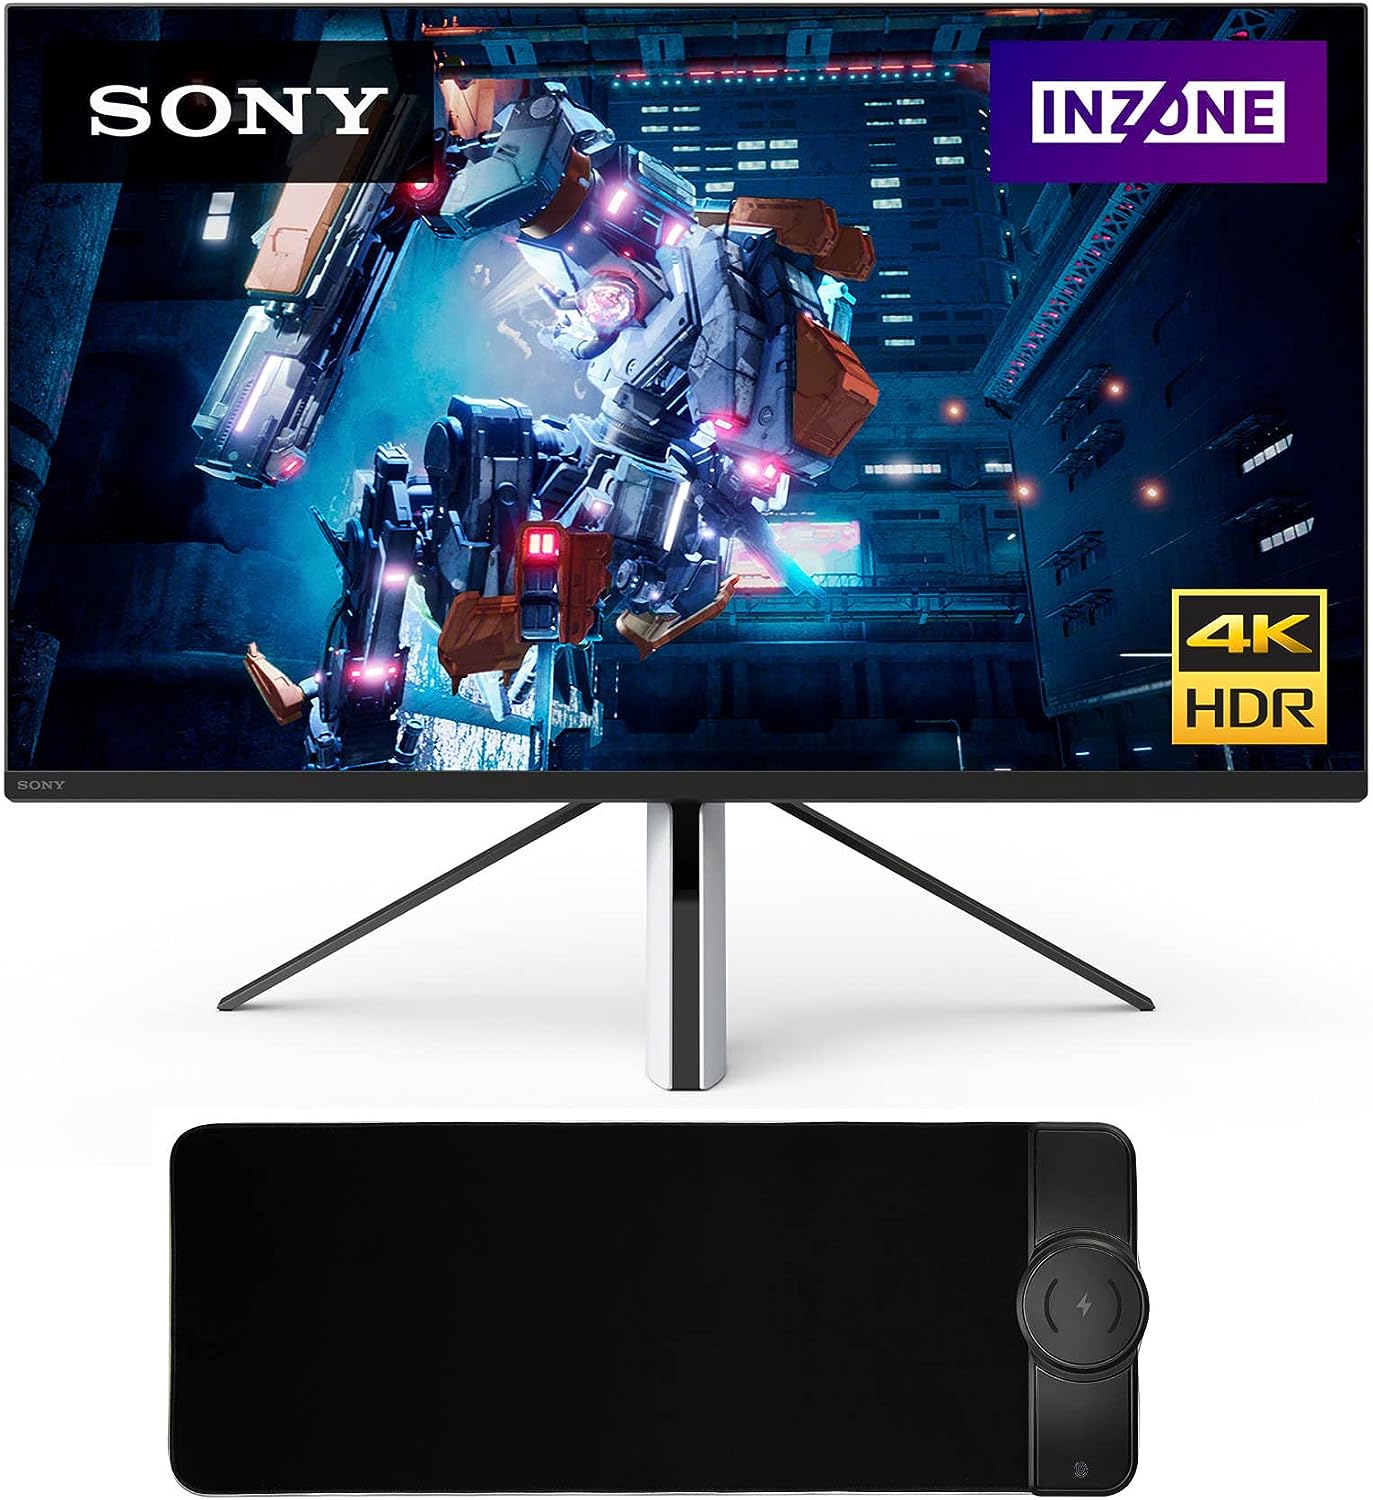 642088122d5809075a7296cd sony 27 inzone m9 4k hdr 144hz gaming